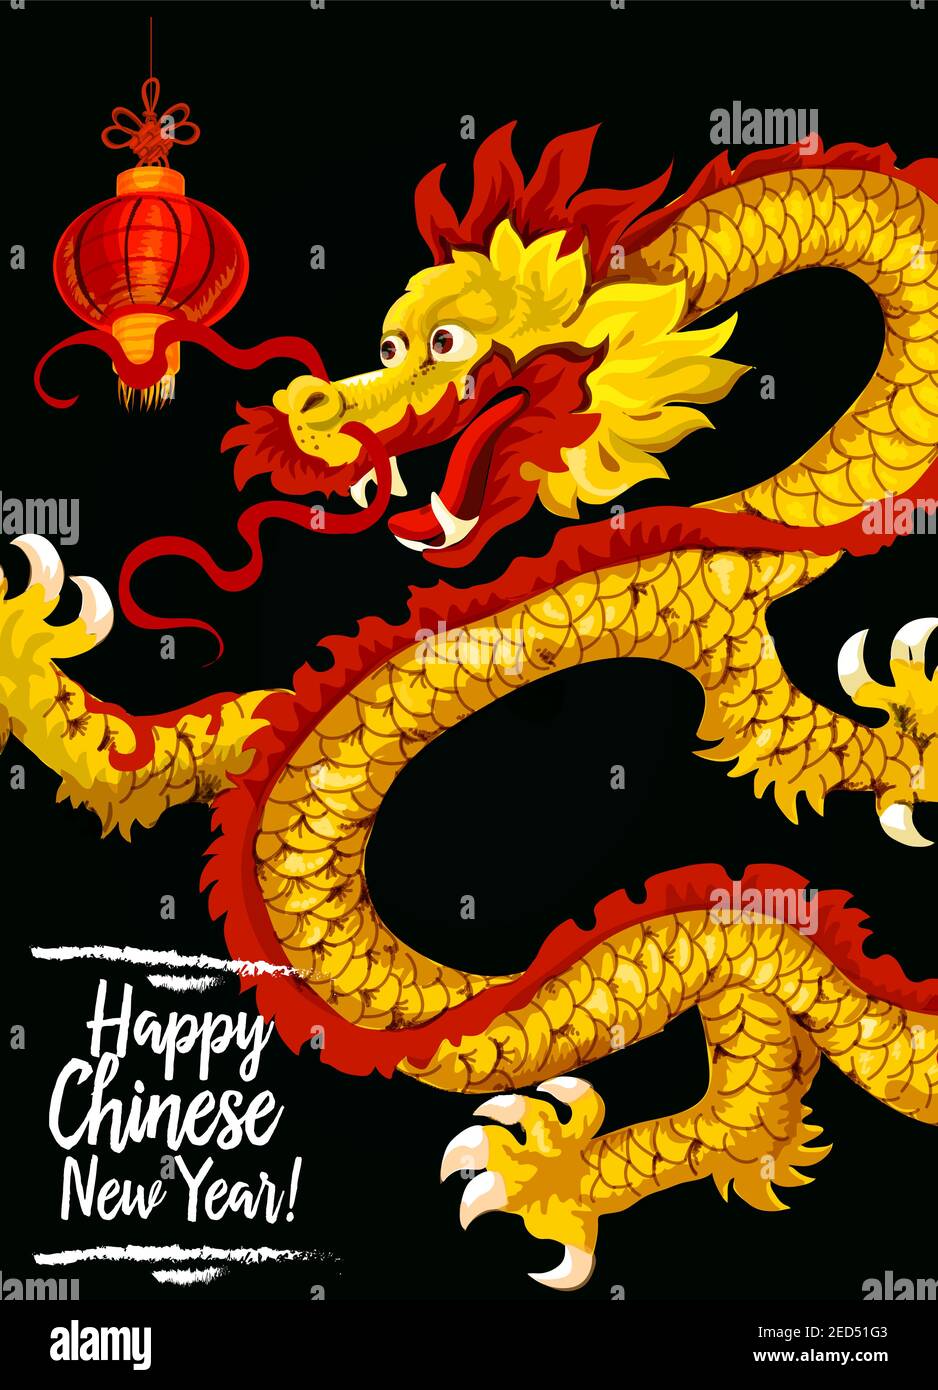 Chinese New Year golden dragon festive poster. Traditional Spring Festival symbol of dancing dragon and red paper lantern. Chinese Lunar New Year holi Stock Vector